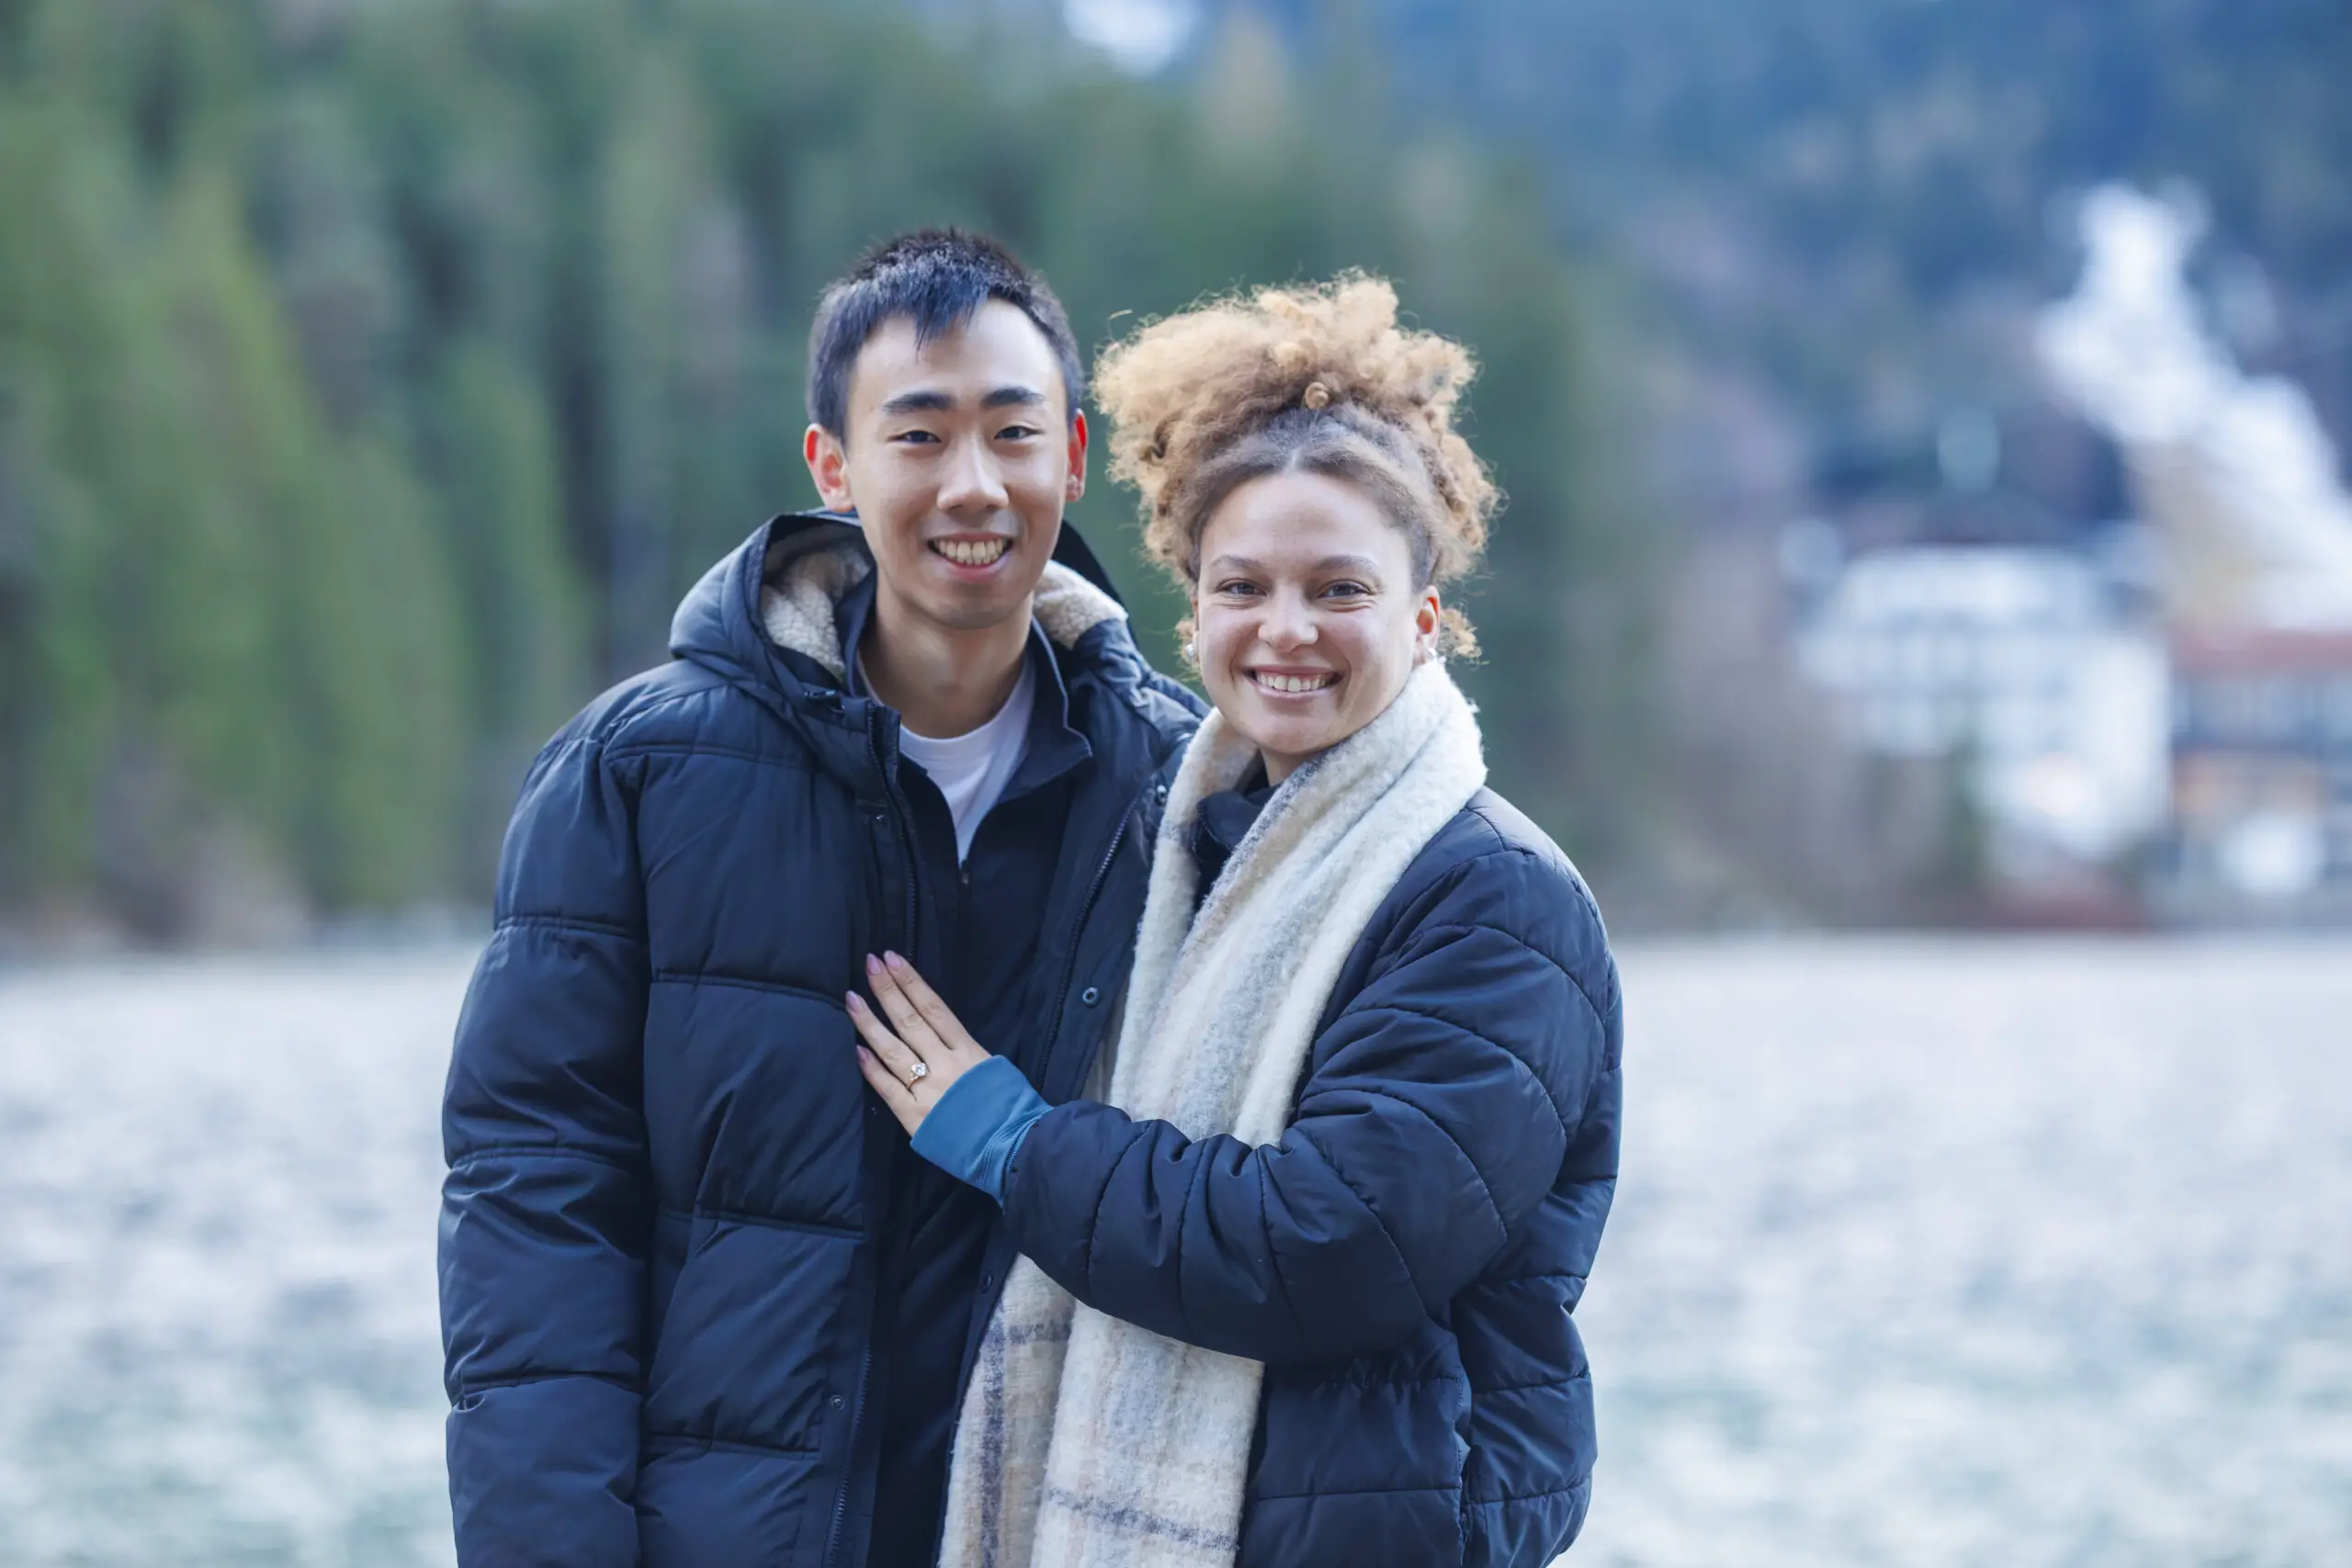 Proposal photoshoot by Tatiana, Localgrapher at the Eibsee Lake